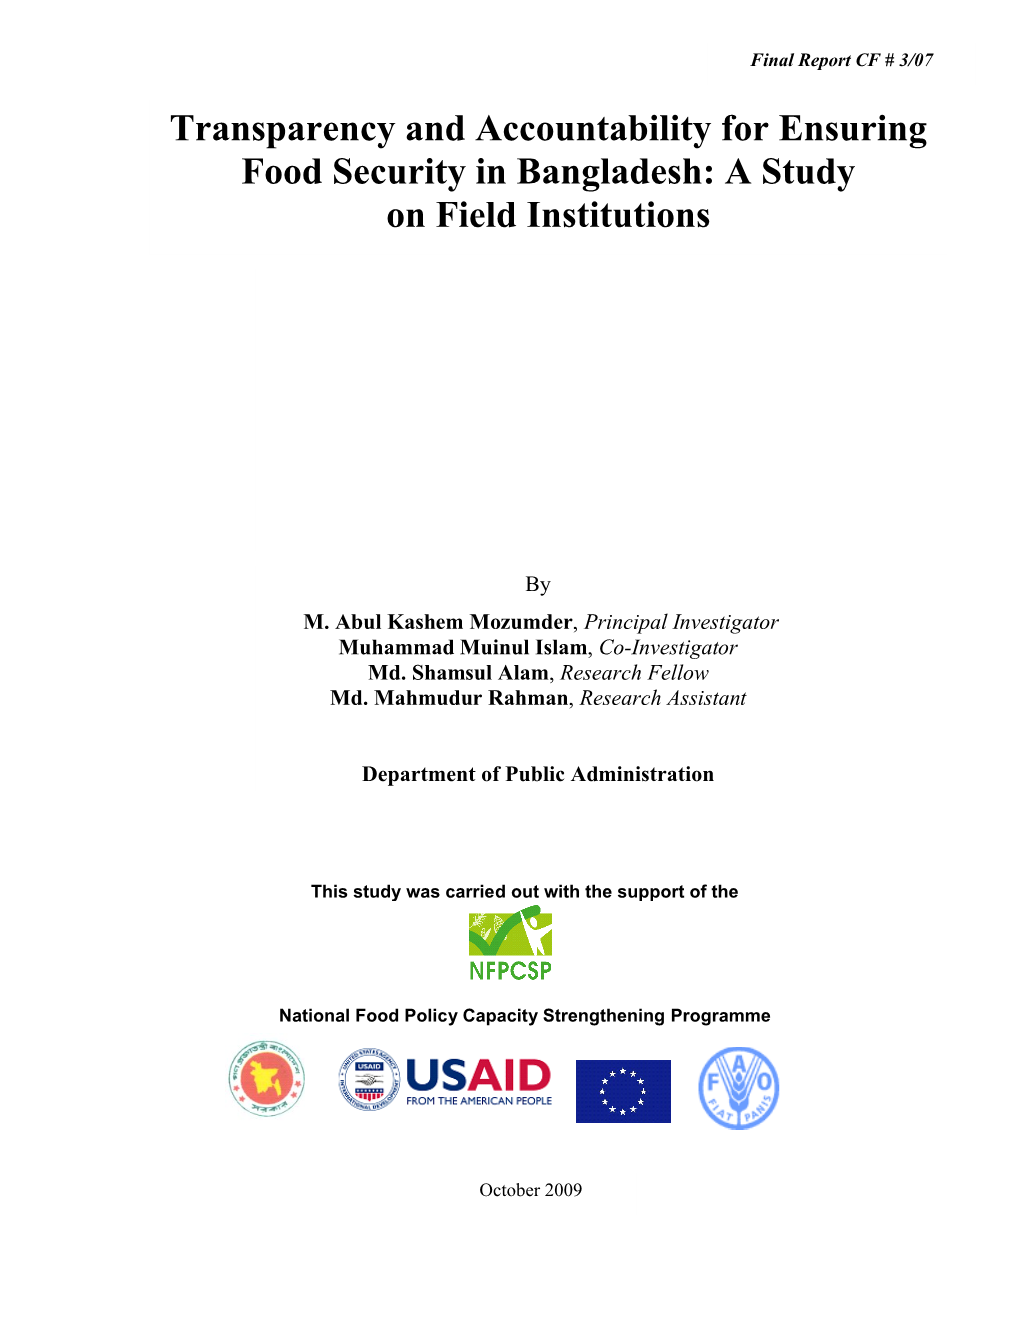 Transparency and Accountability for Ensuring Food Security in Bangladesh: a Study on Field Institutions